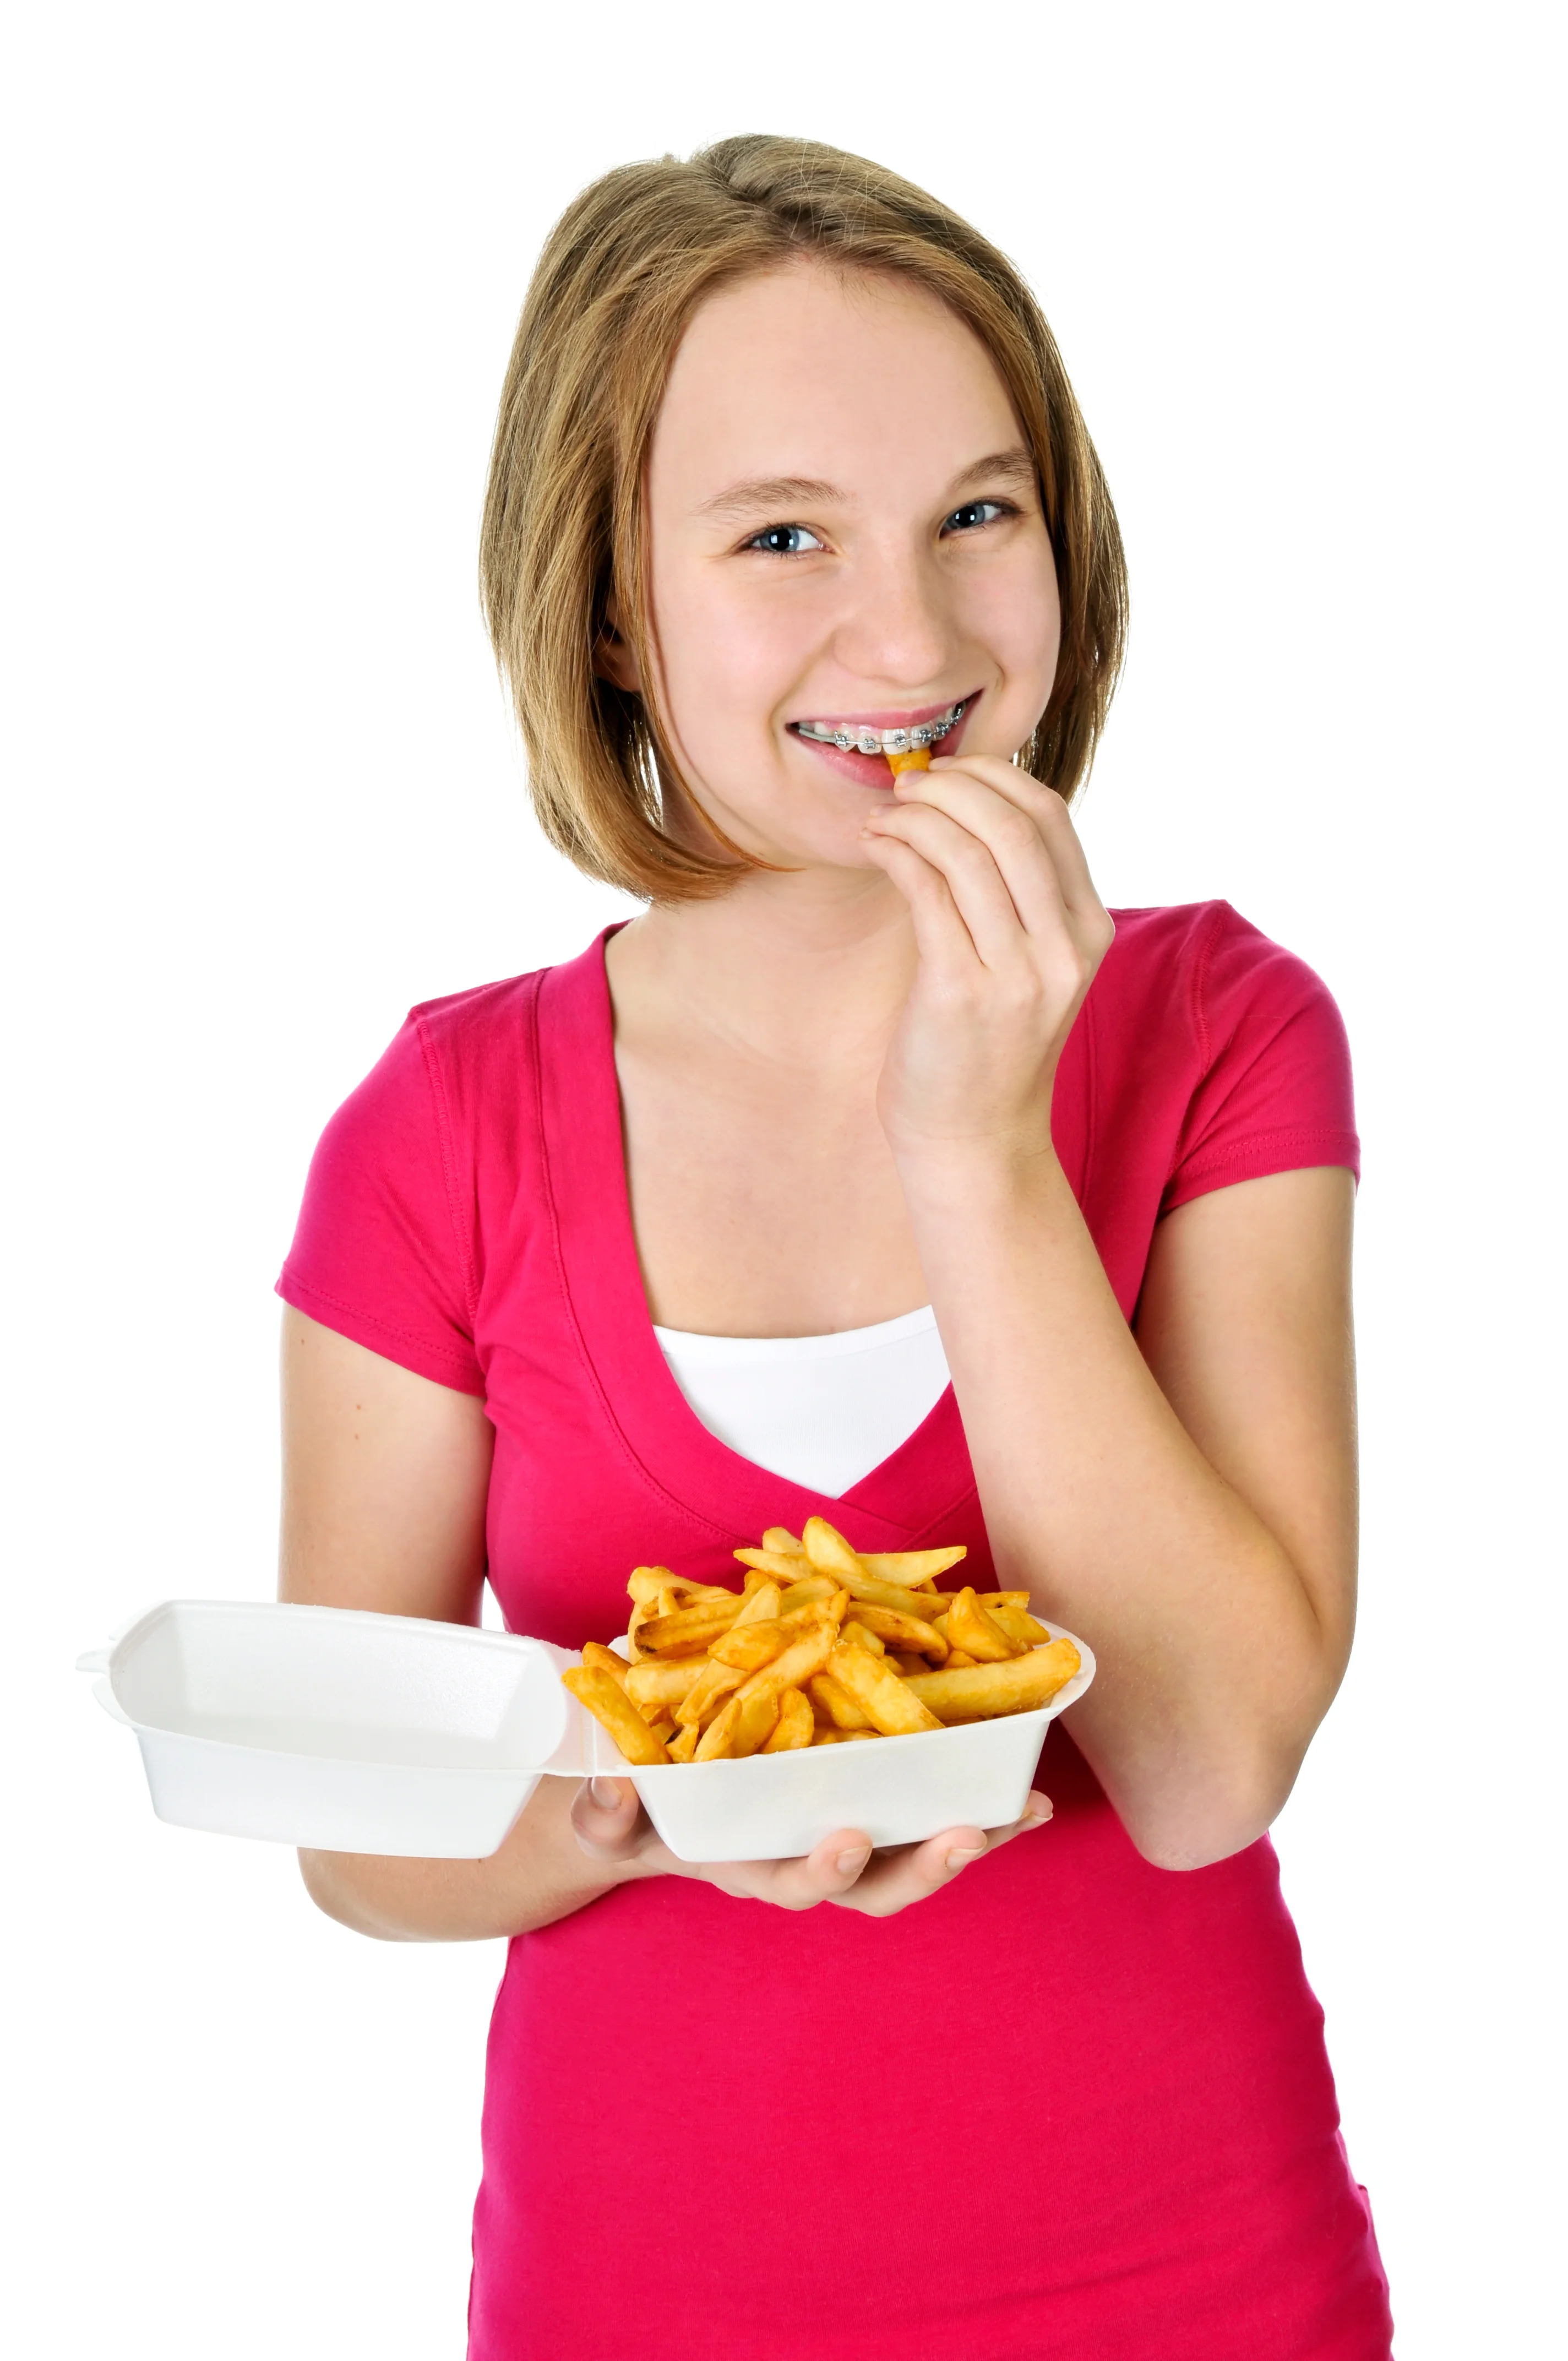 When Can I Eat Fries with Braces